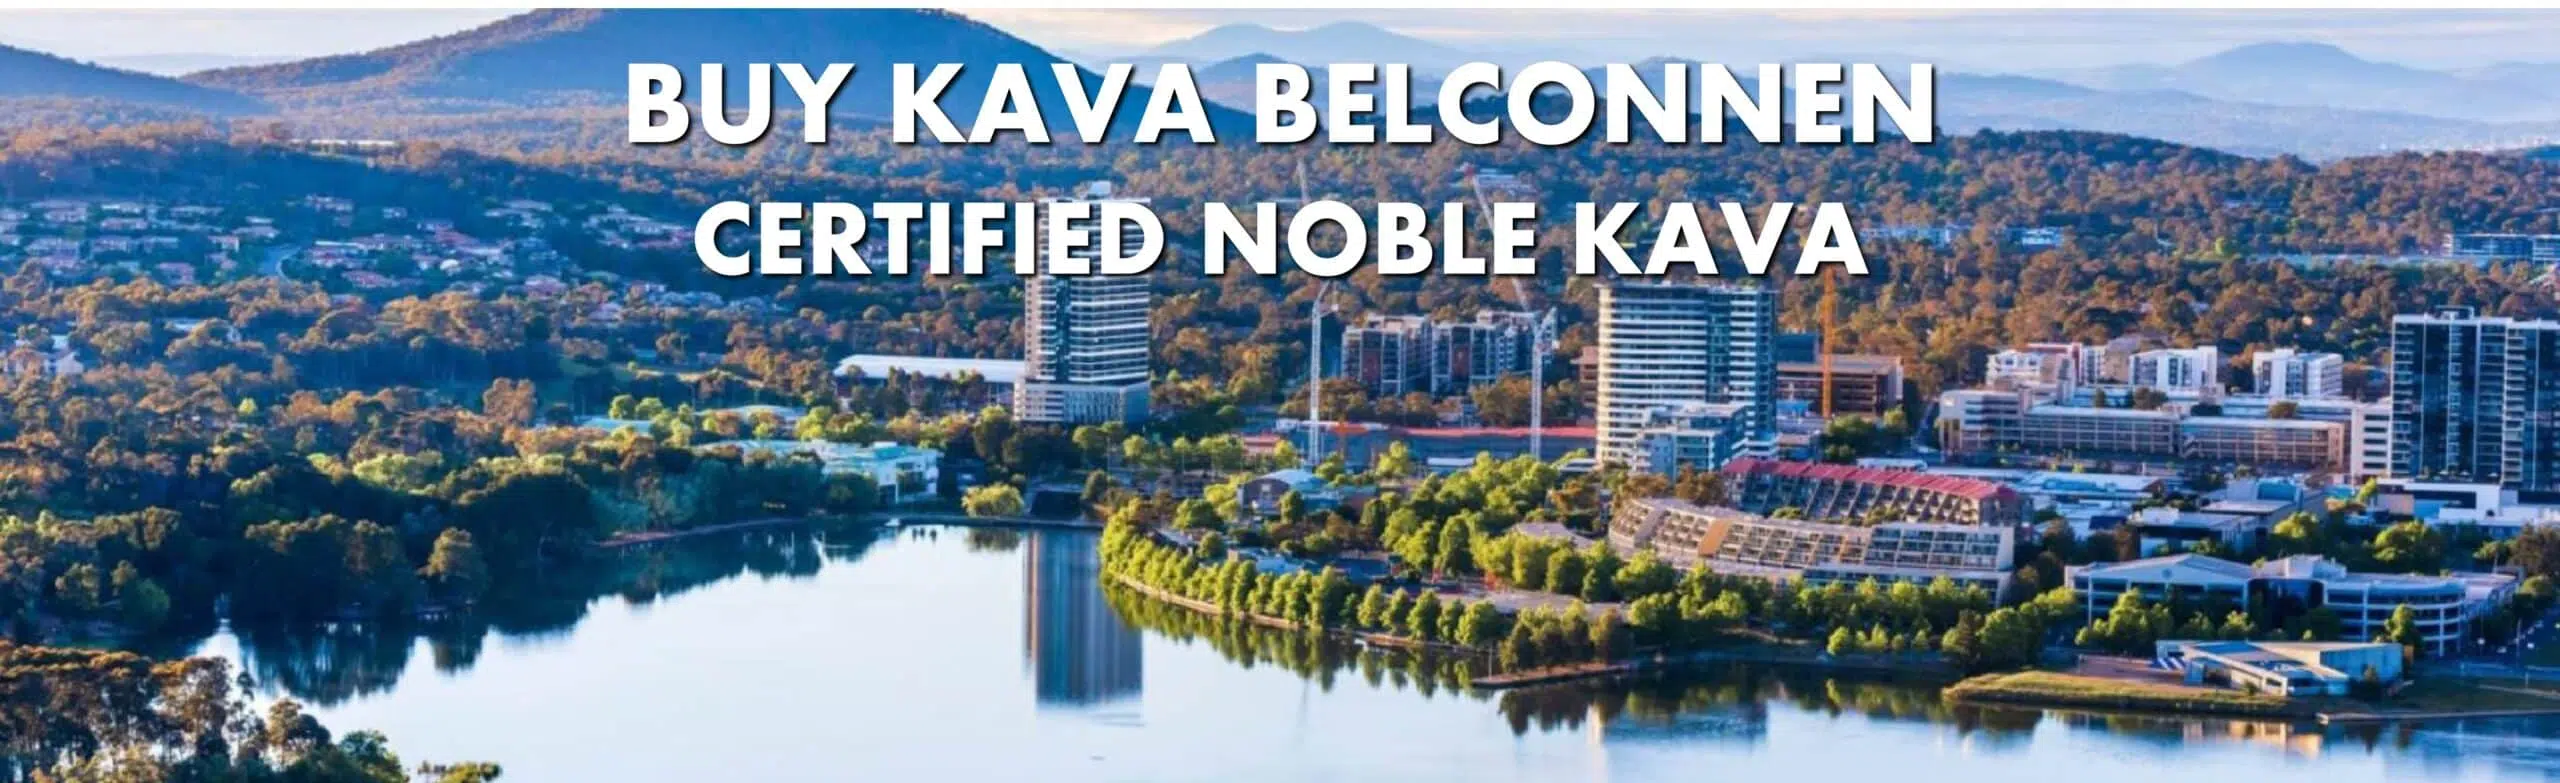 Lakefront scene with background of tall apartment buildings in Belconnen, ACT with caption Buy Kava Belconnen Certified Noble Kava